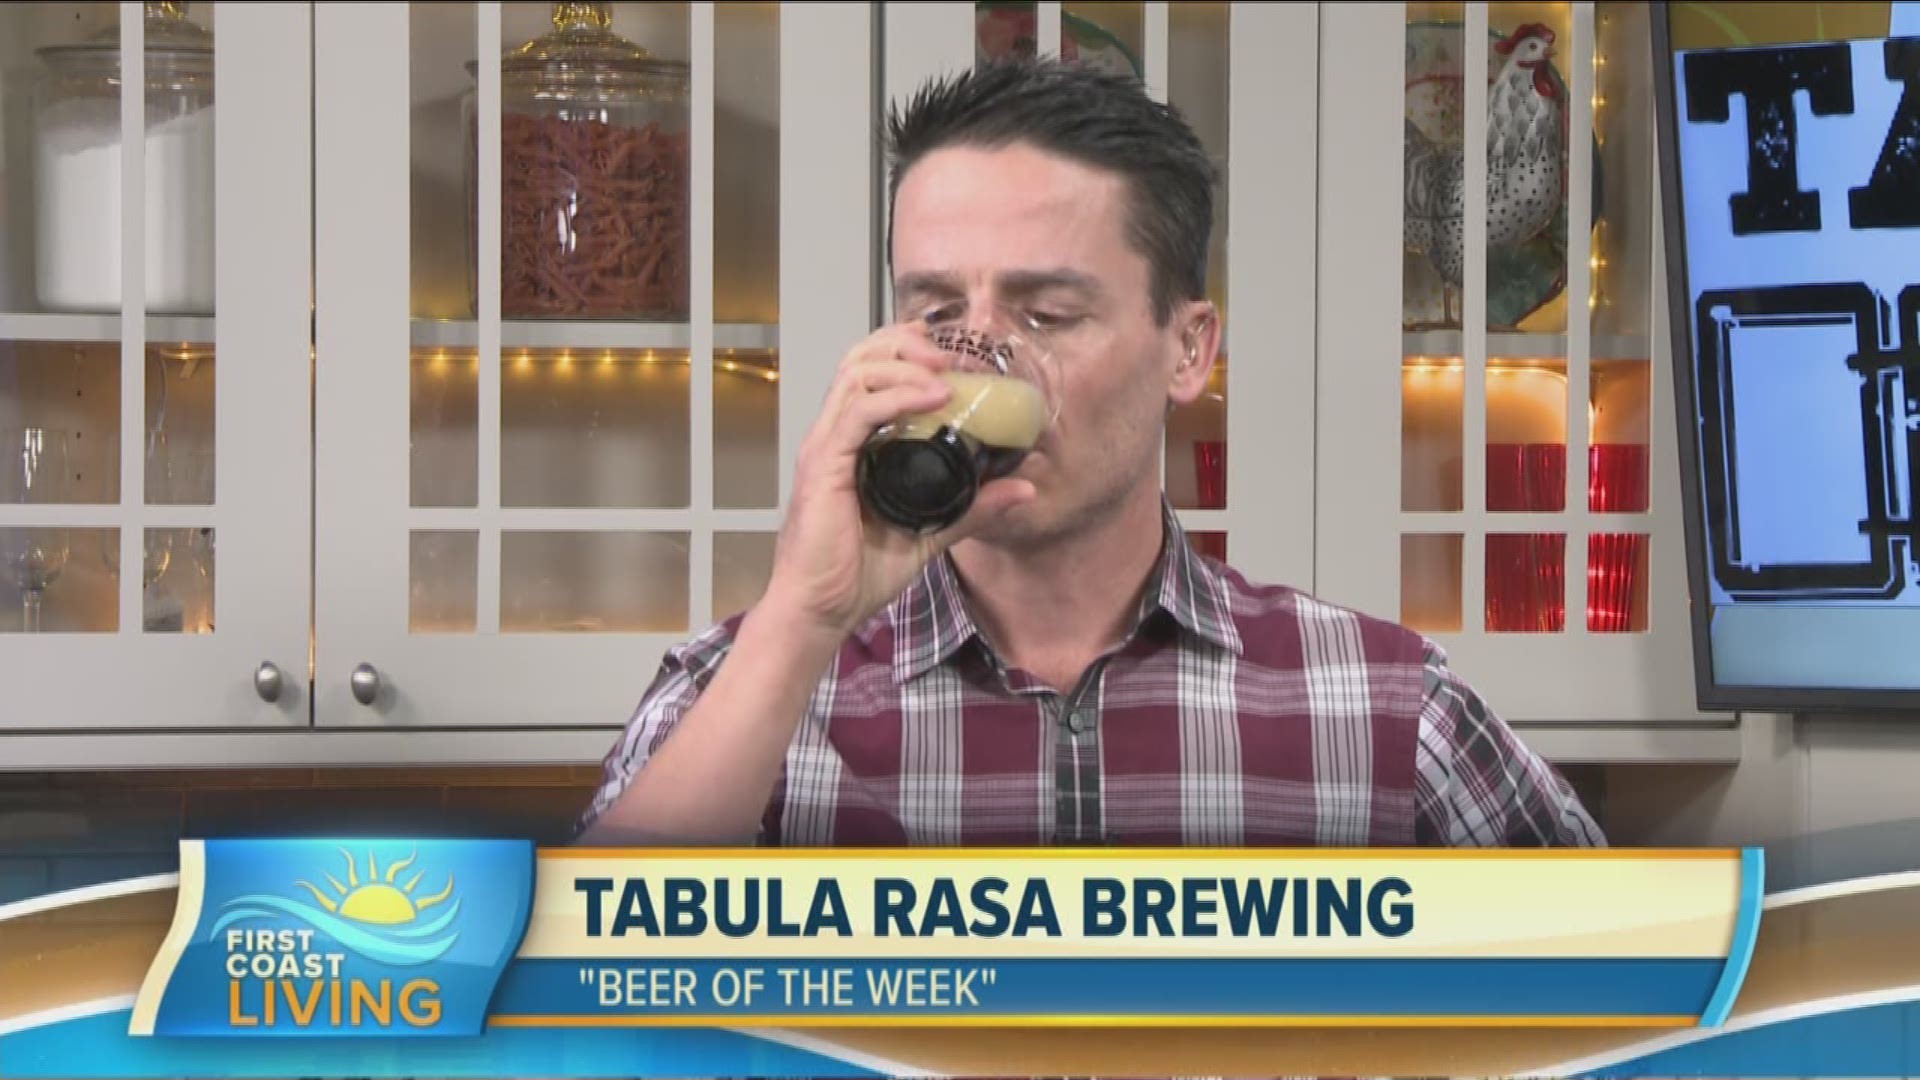 Don't quench your thirst with just any beer during March Madness, try Curtis Dvorak's pick of the Beer of the Week from Tabula Rasa.